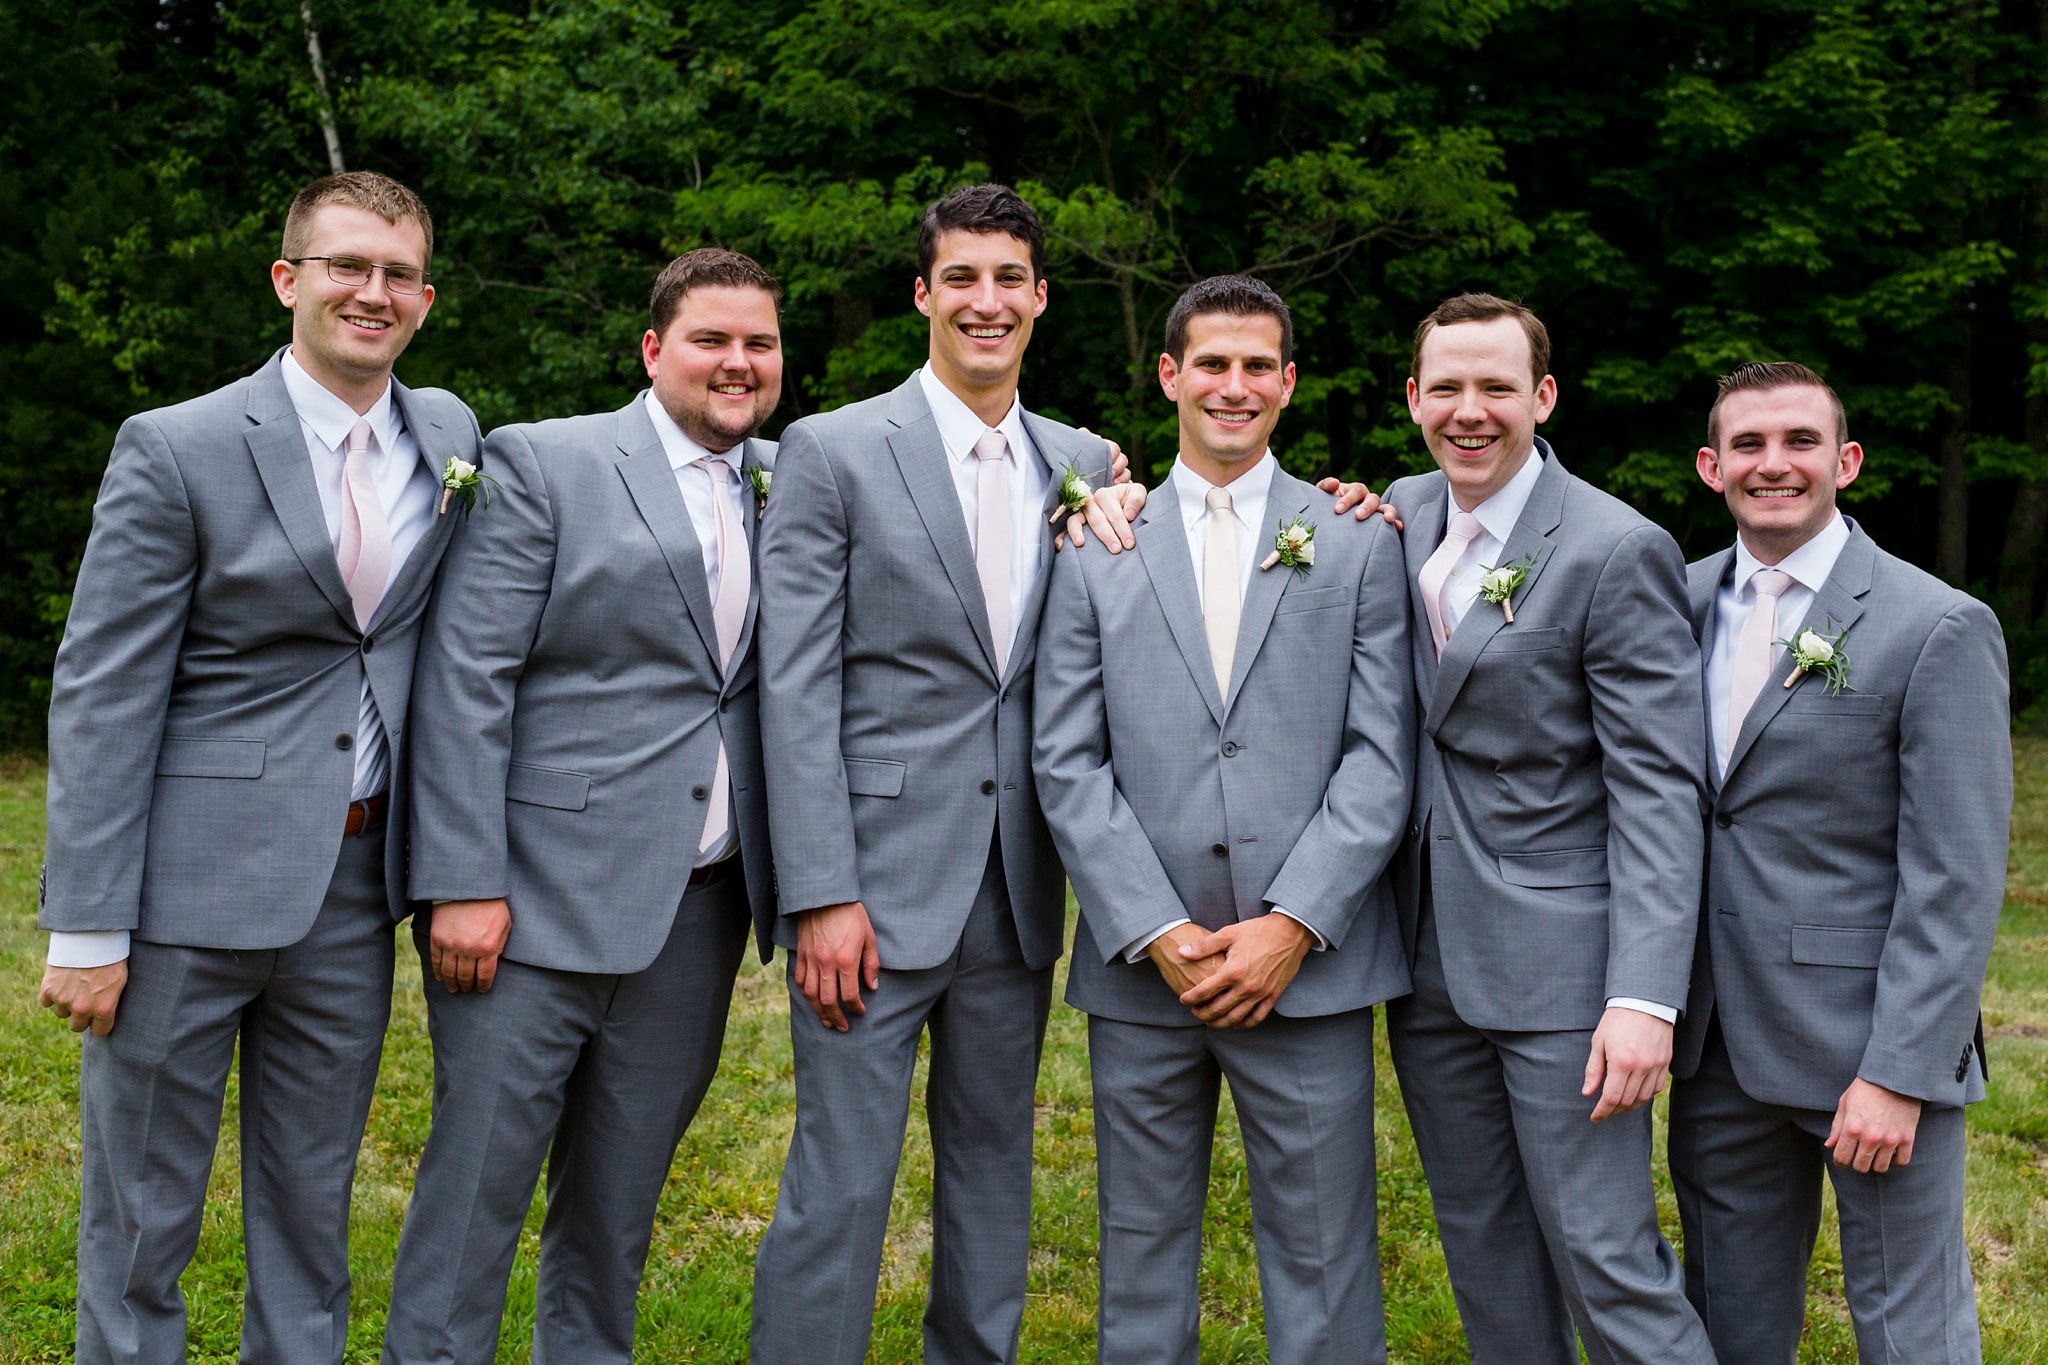 The groom and his friends hang out before the ceremony begins in New Hampshire